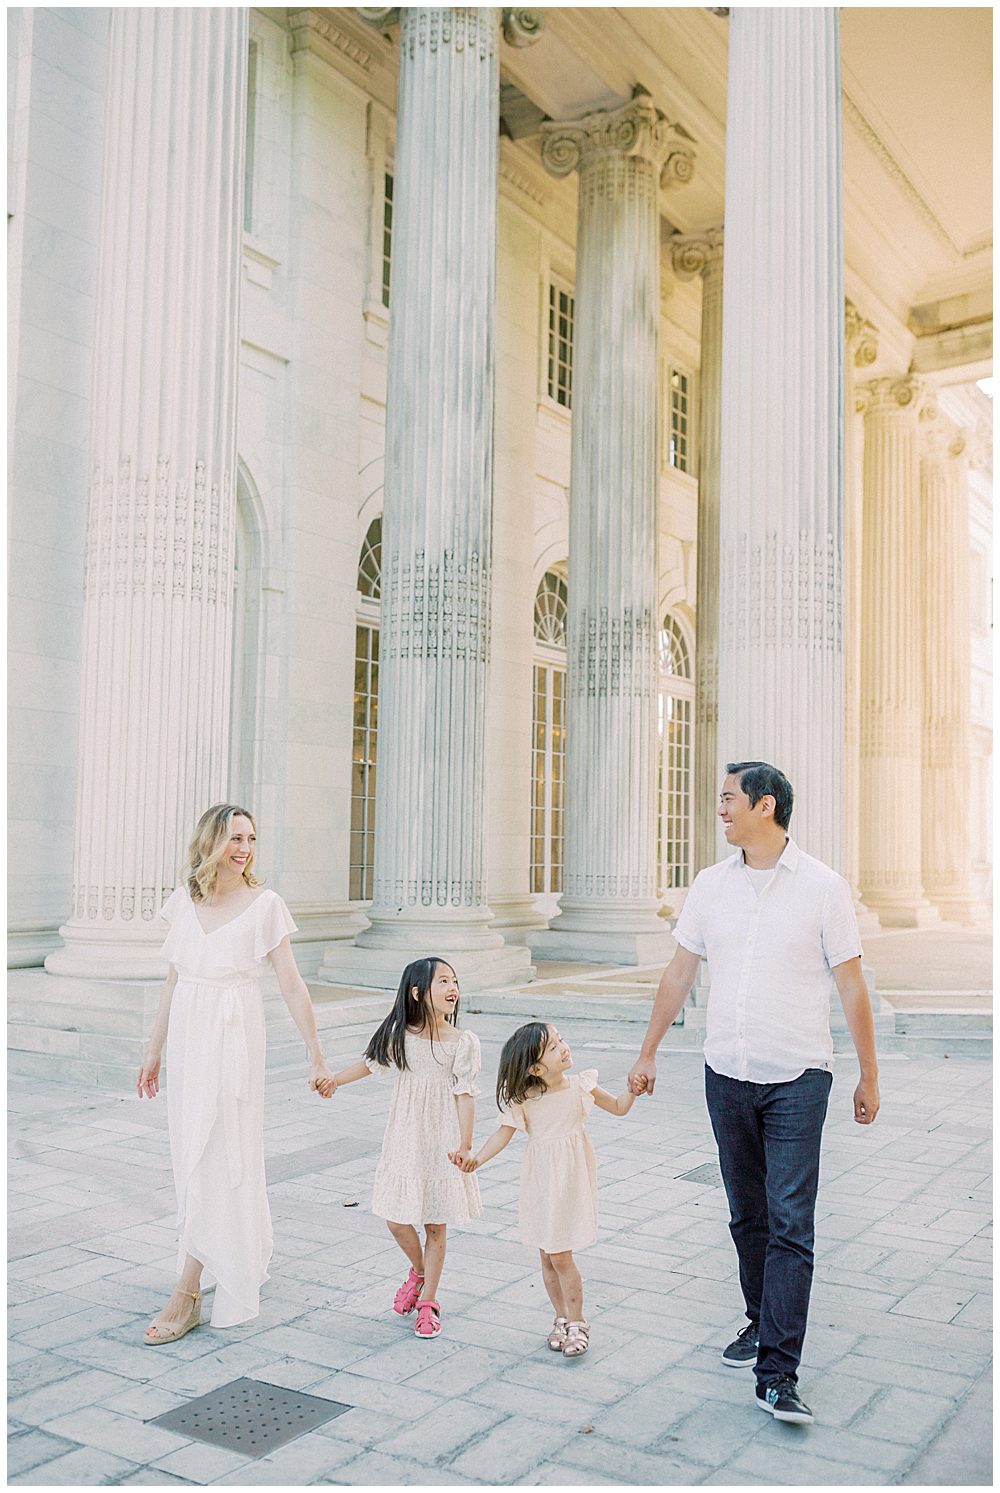 Mother, father, and two young daughters walk together in front of the columns at DAR Constitution Hall.